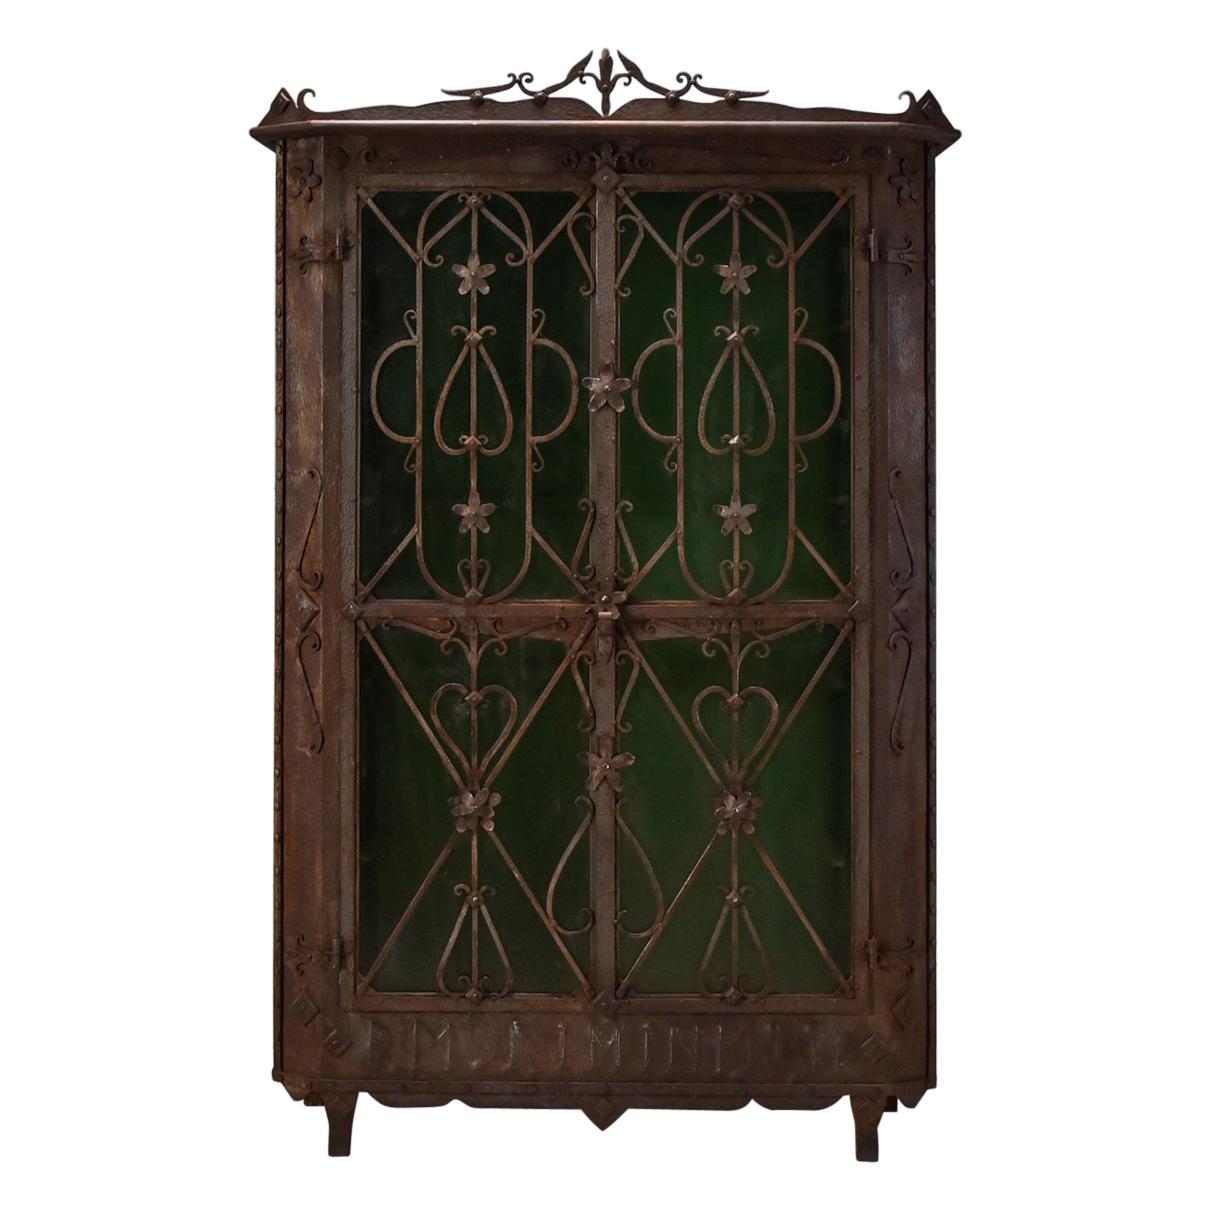 The Iron Cabinet For Sale